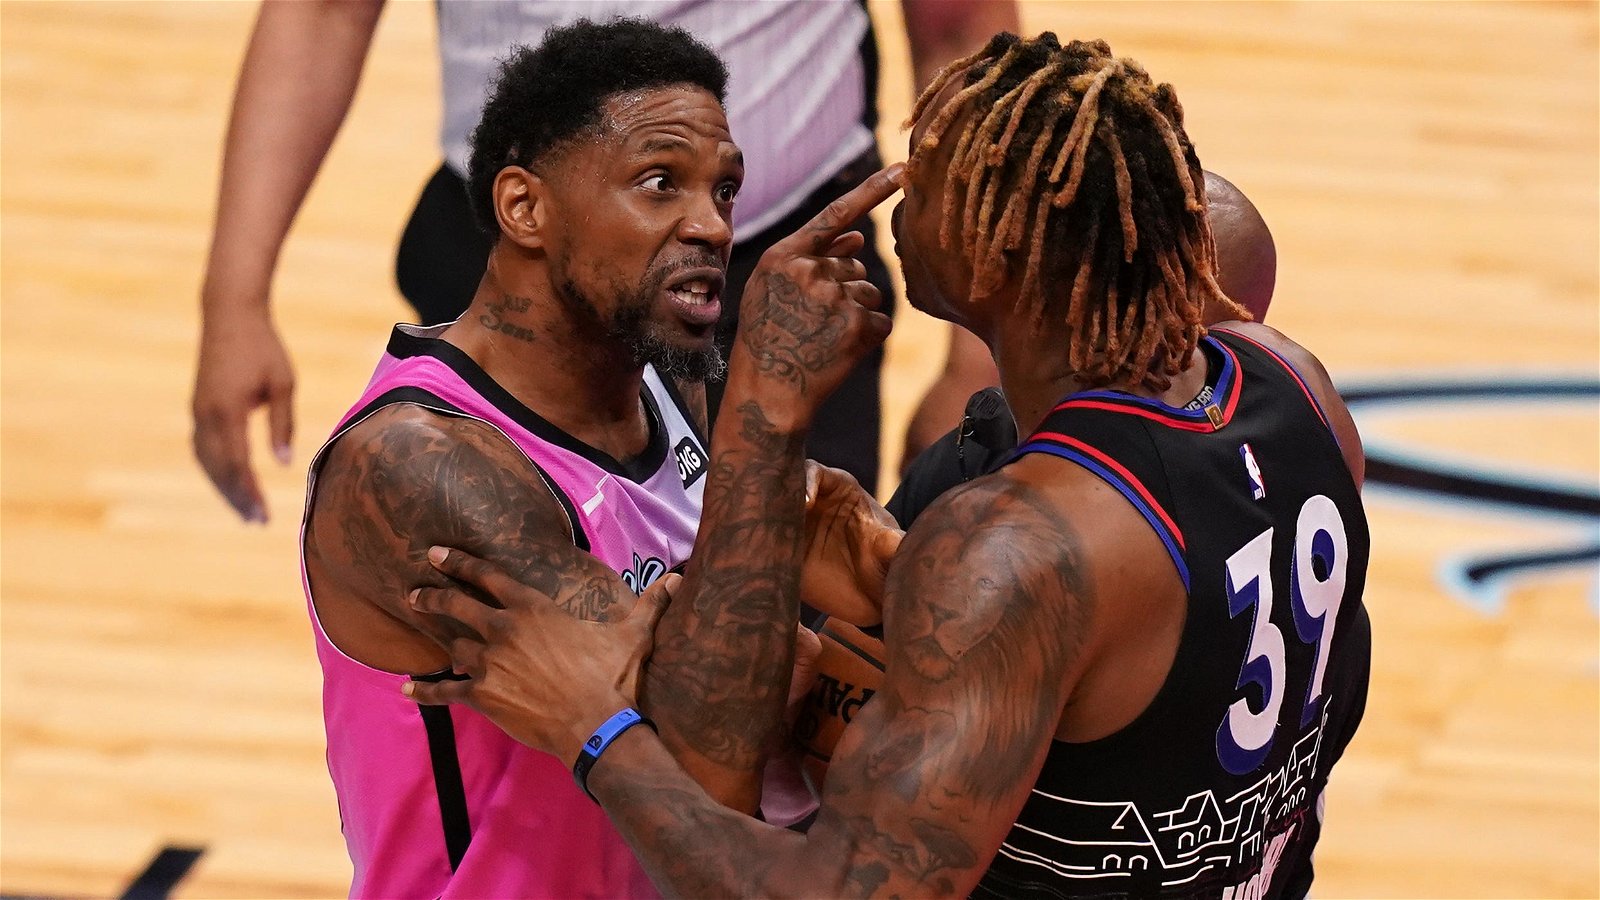 Is Udonis Haslem still playing? What is his role on the Heat? - AS USA